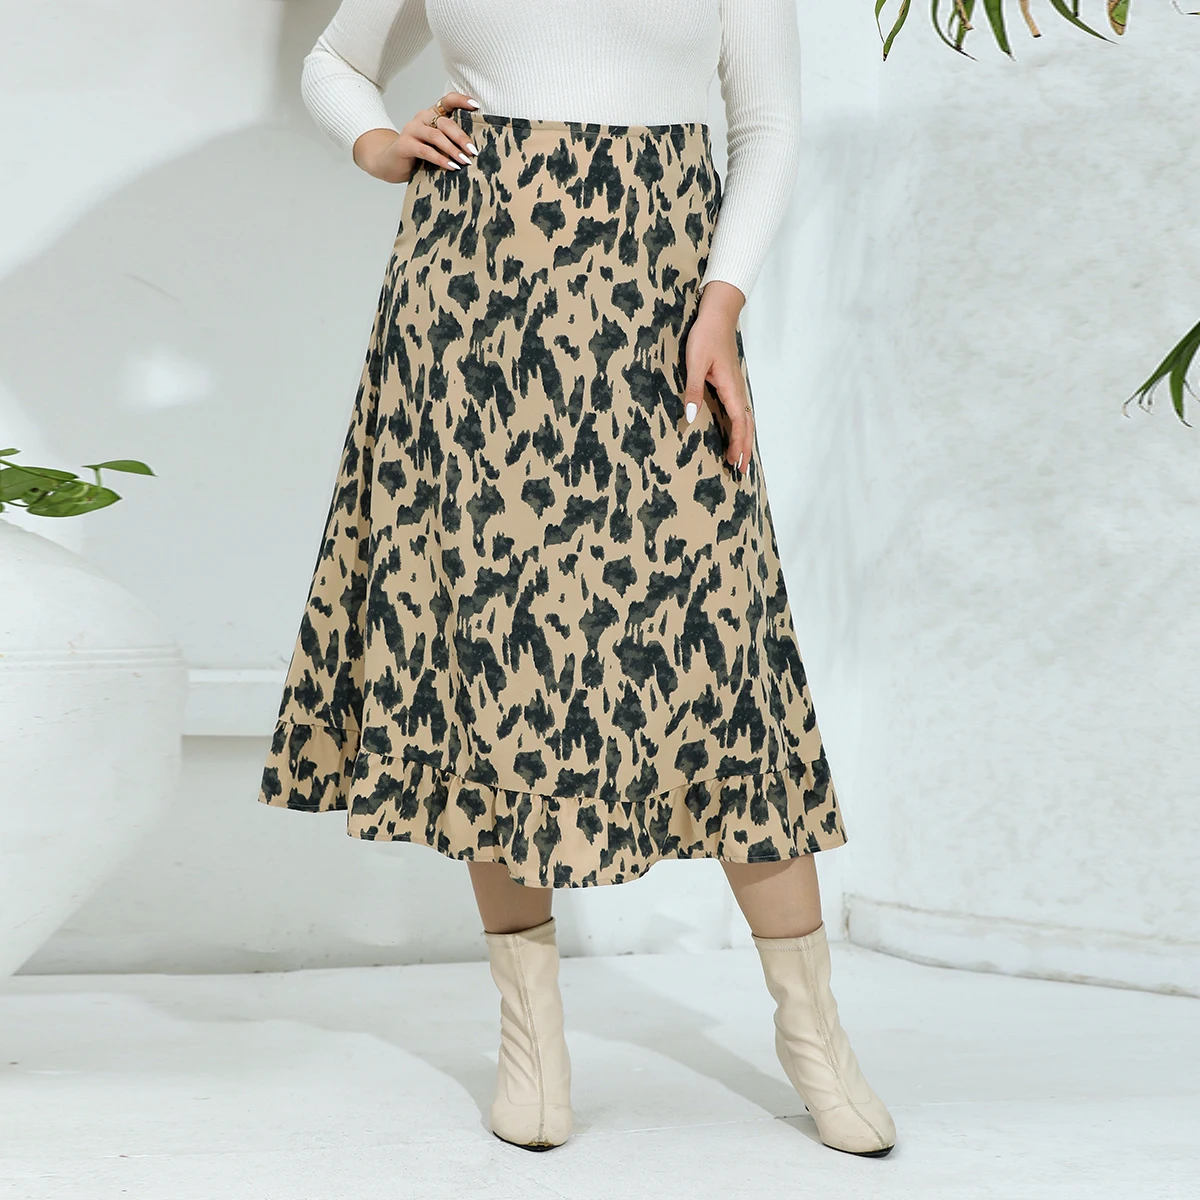 

Plus Size Skirt New Leopard Print Ruffle Skirt Casual Skirt 1XL-5XL Polyester For Spring & Summer Women's Plus Size Clothing